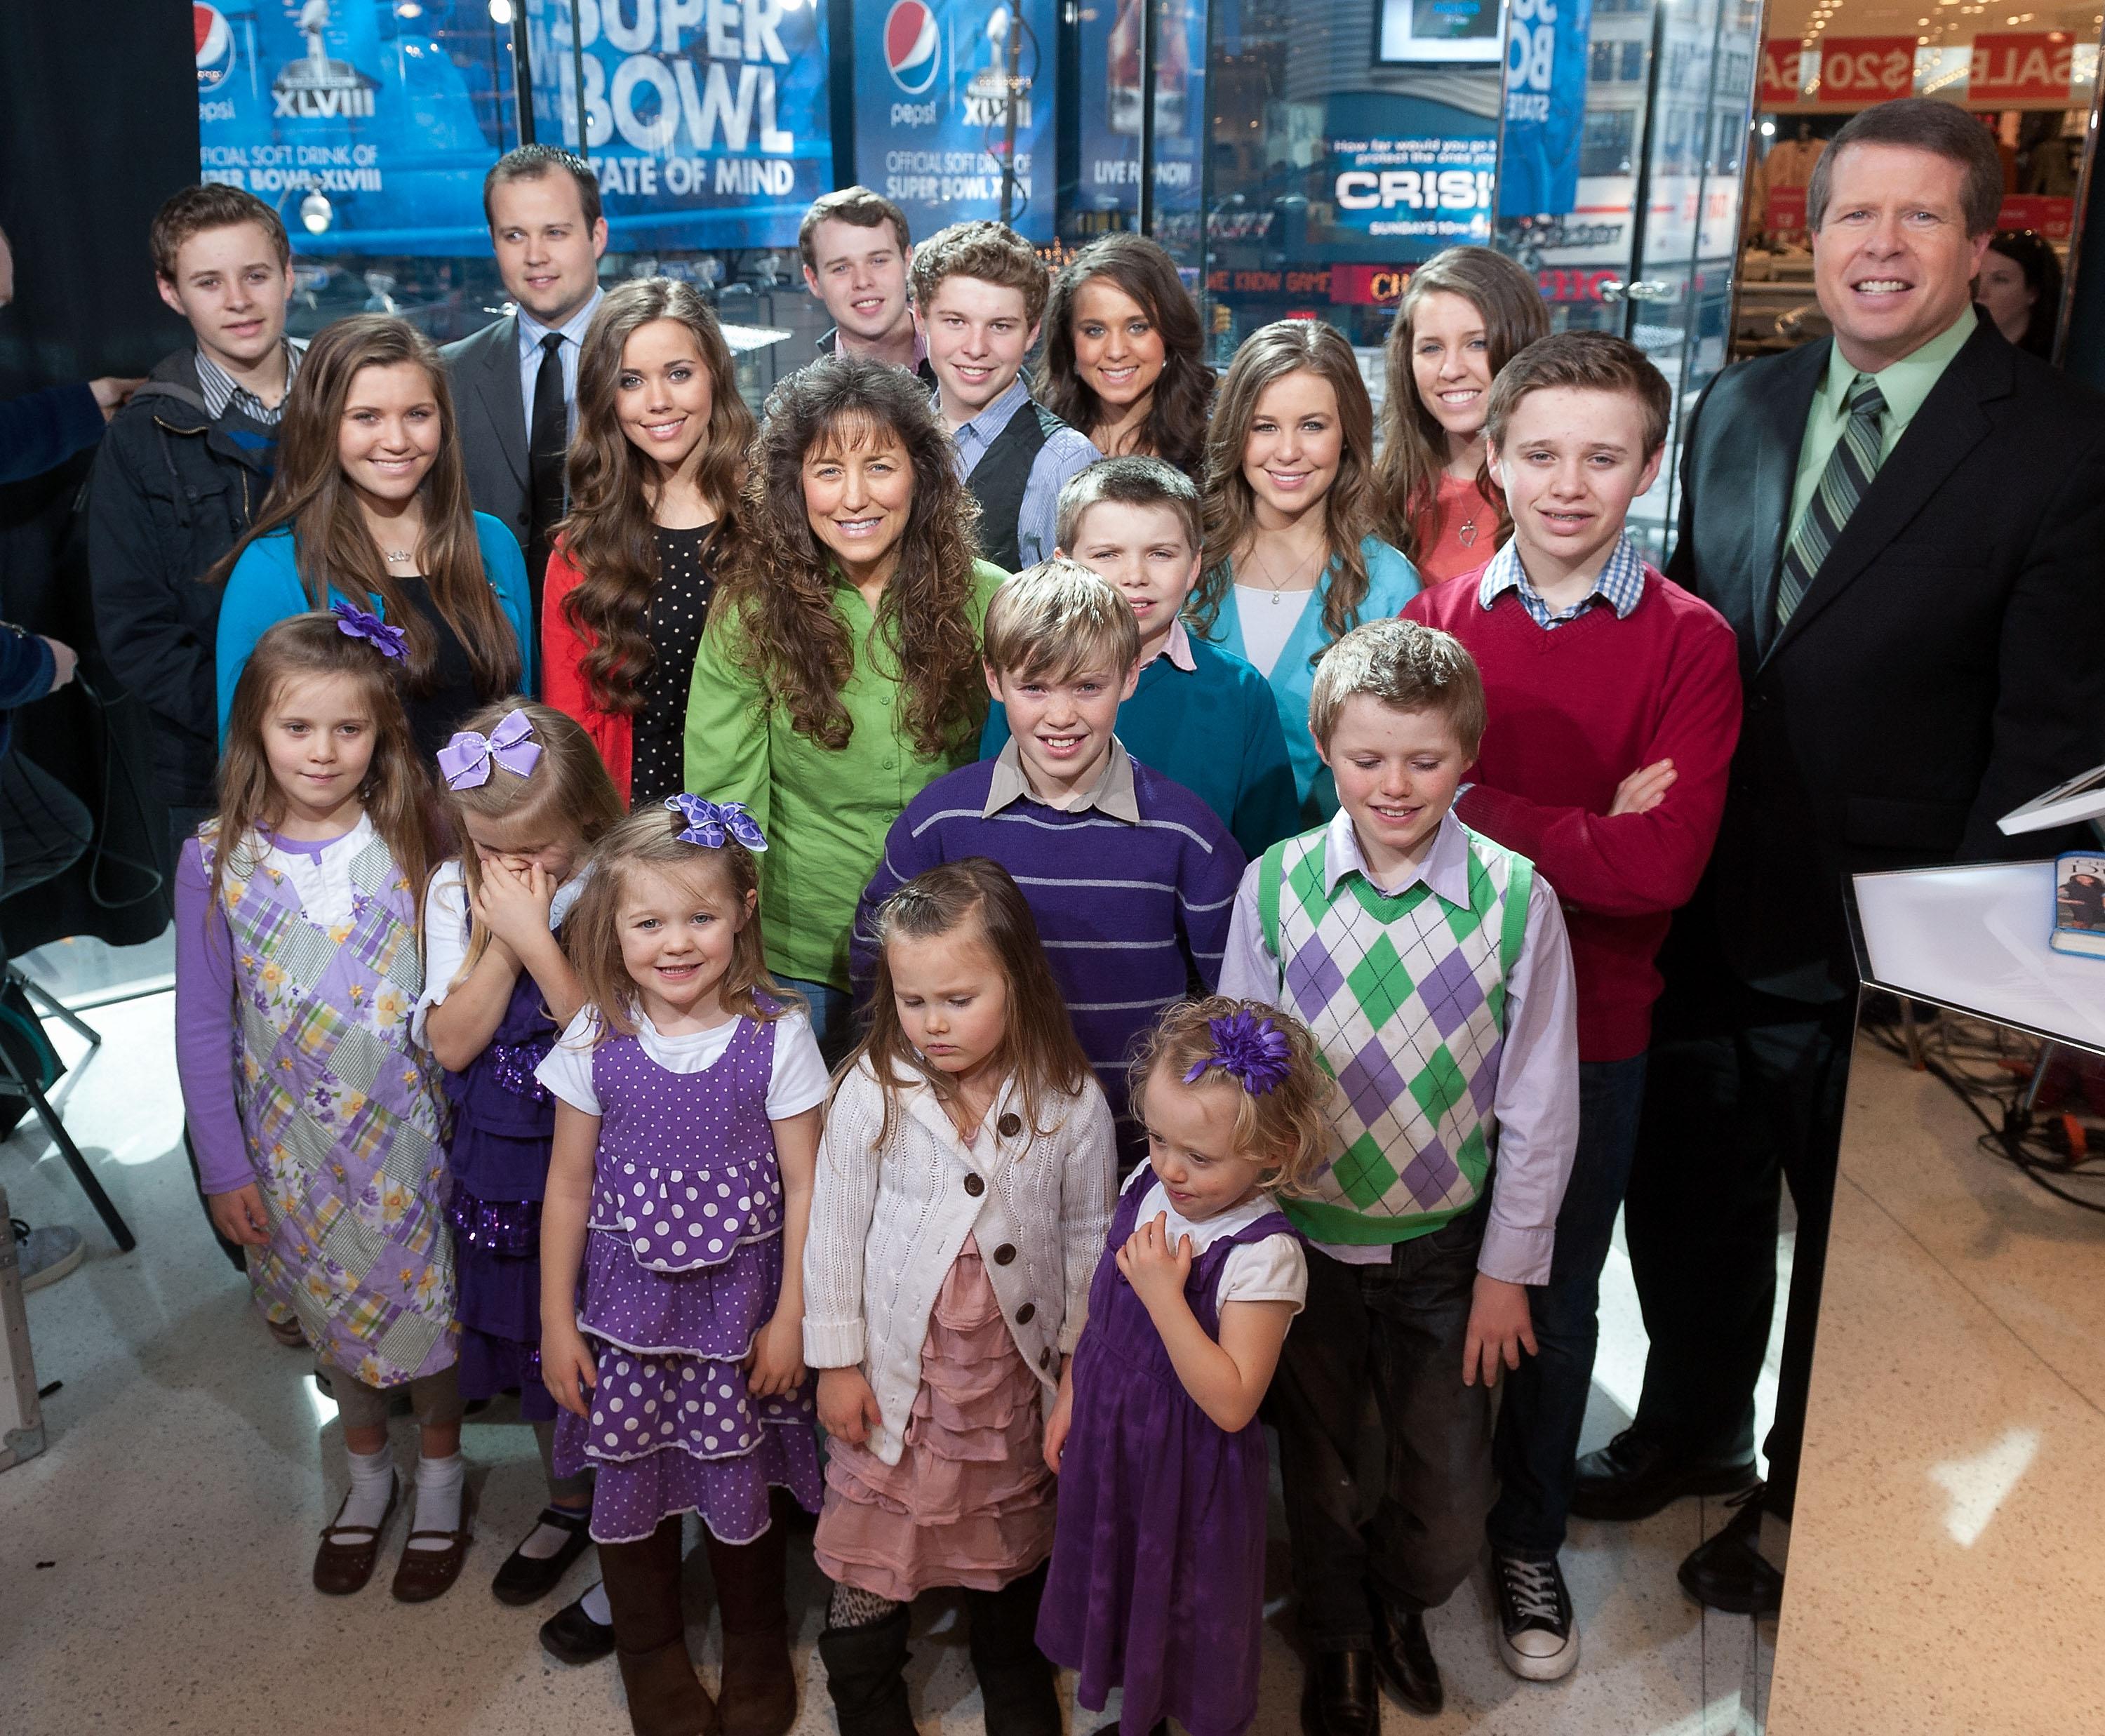 What Caused the Strain Between Jill Duggar and Her Family, the Duggars?